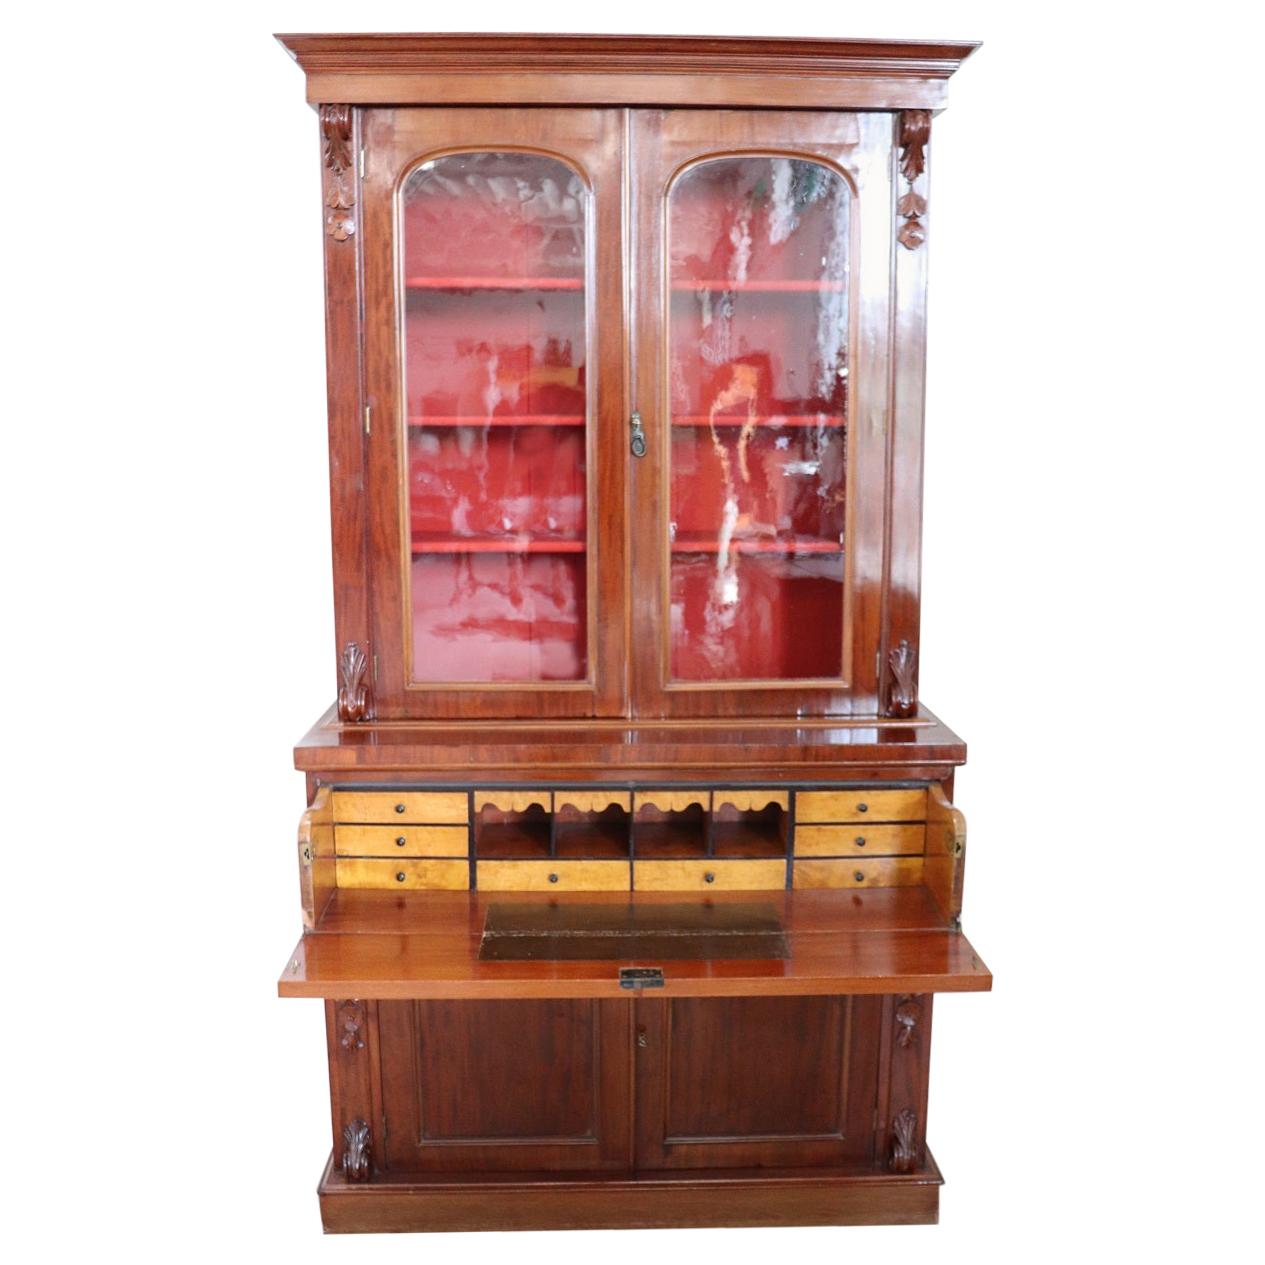 19th Century English Mahogany Antique Cabinet with Writing Desk